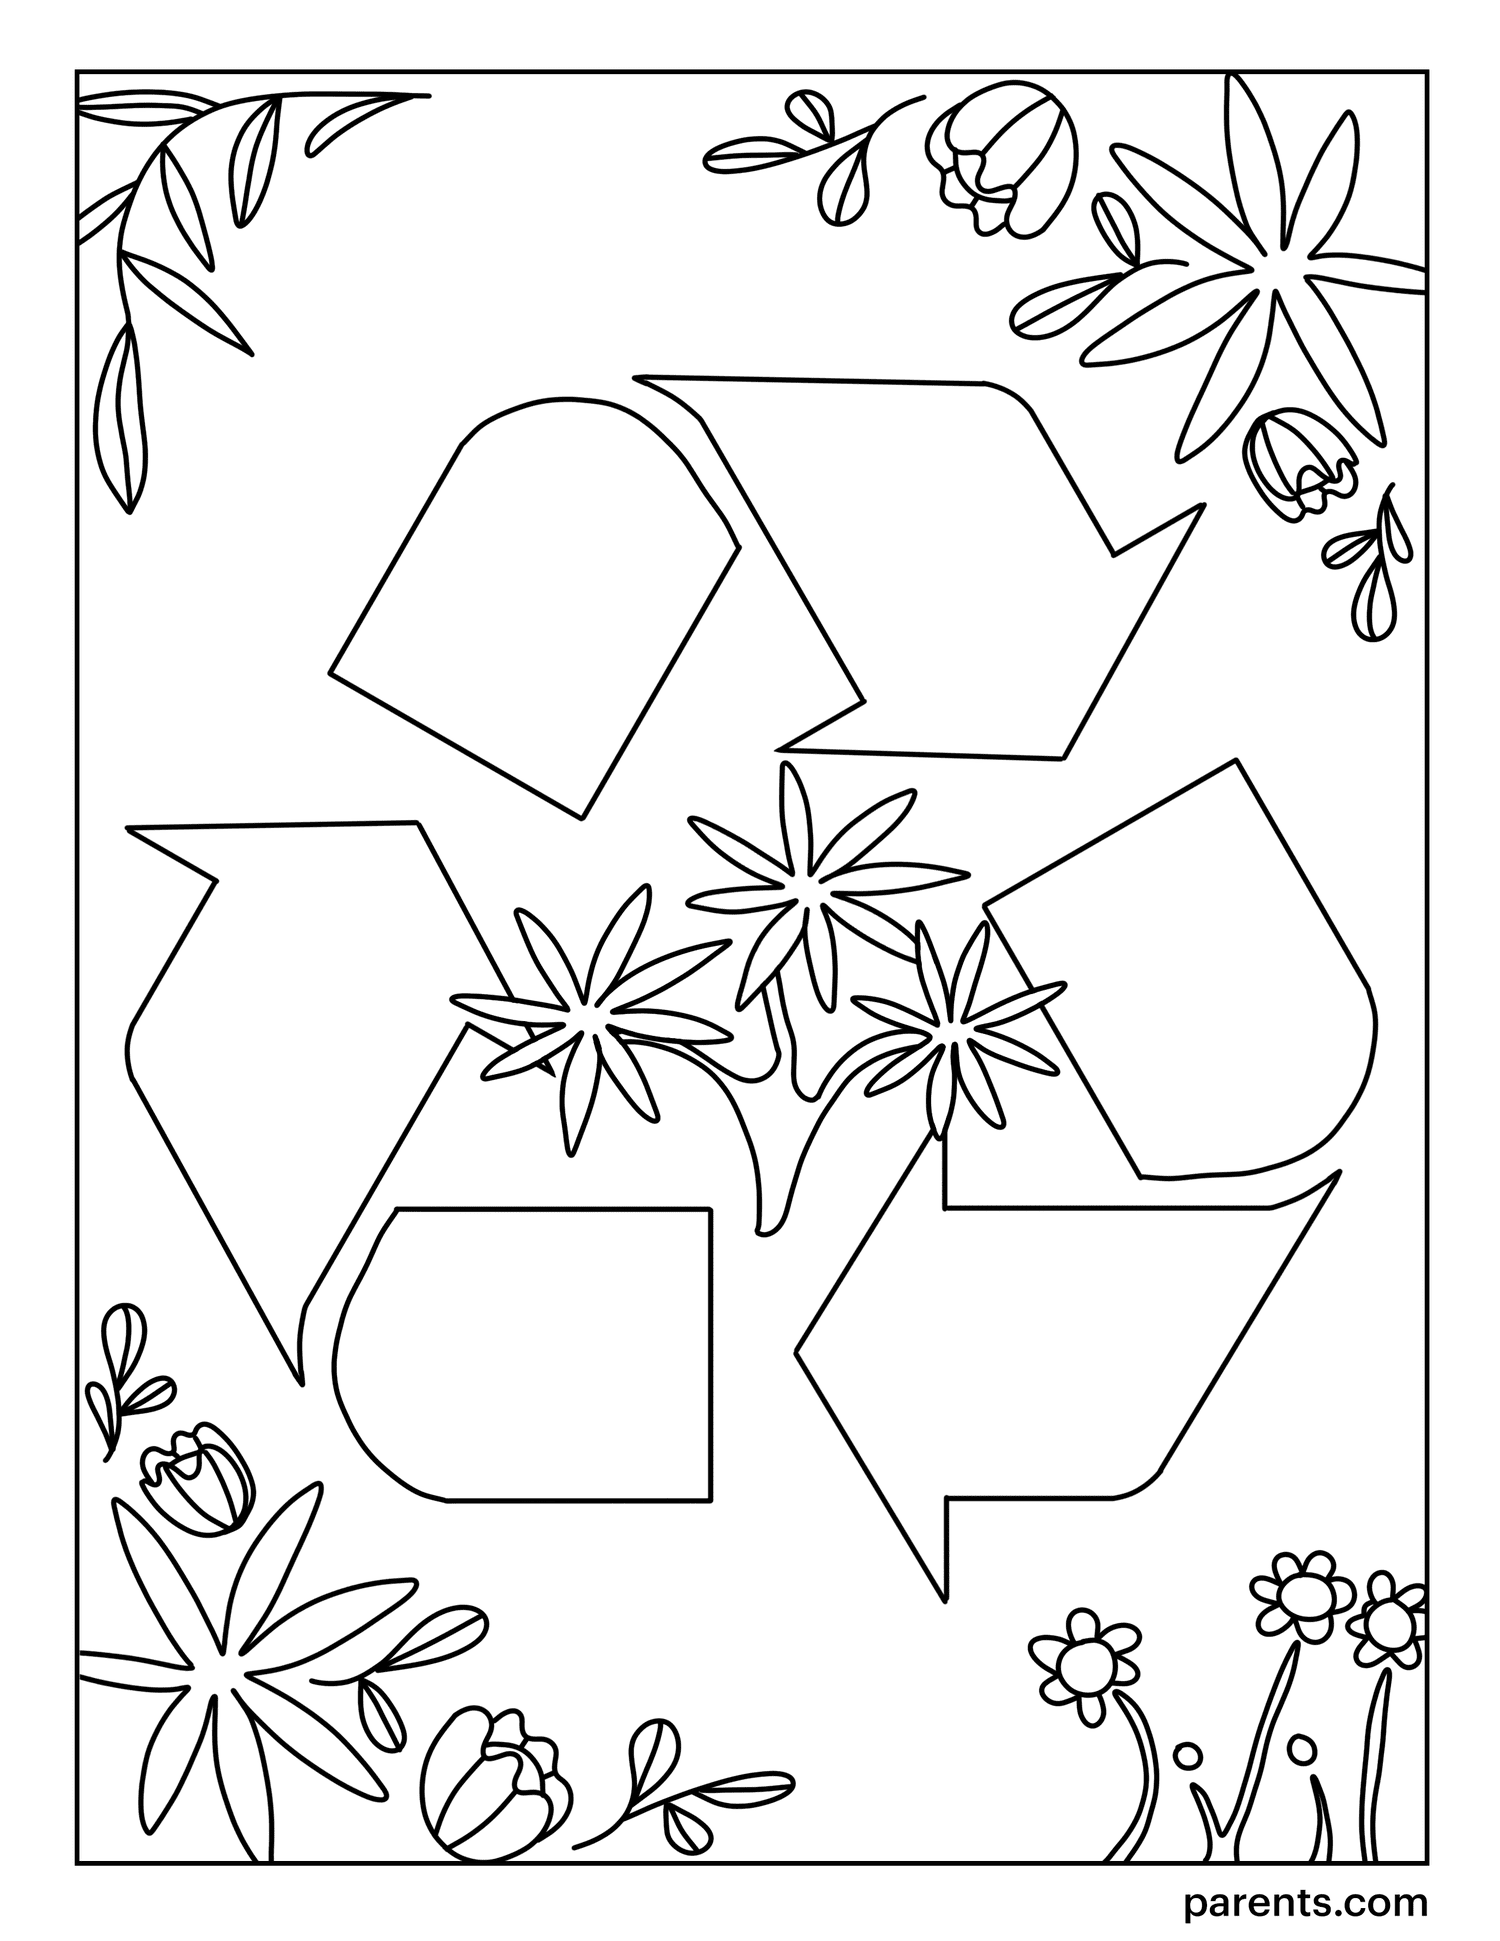 Free earth day coloring pages for kids